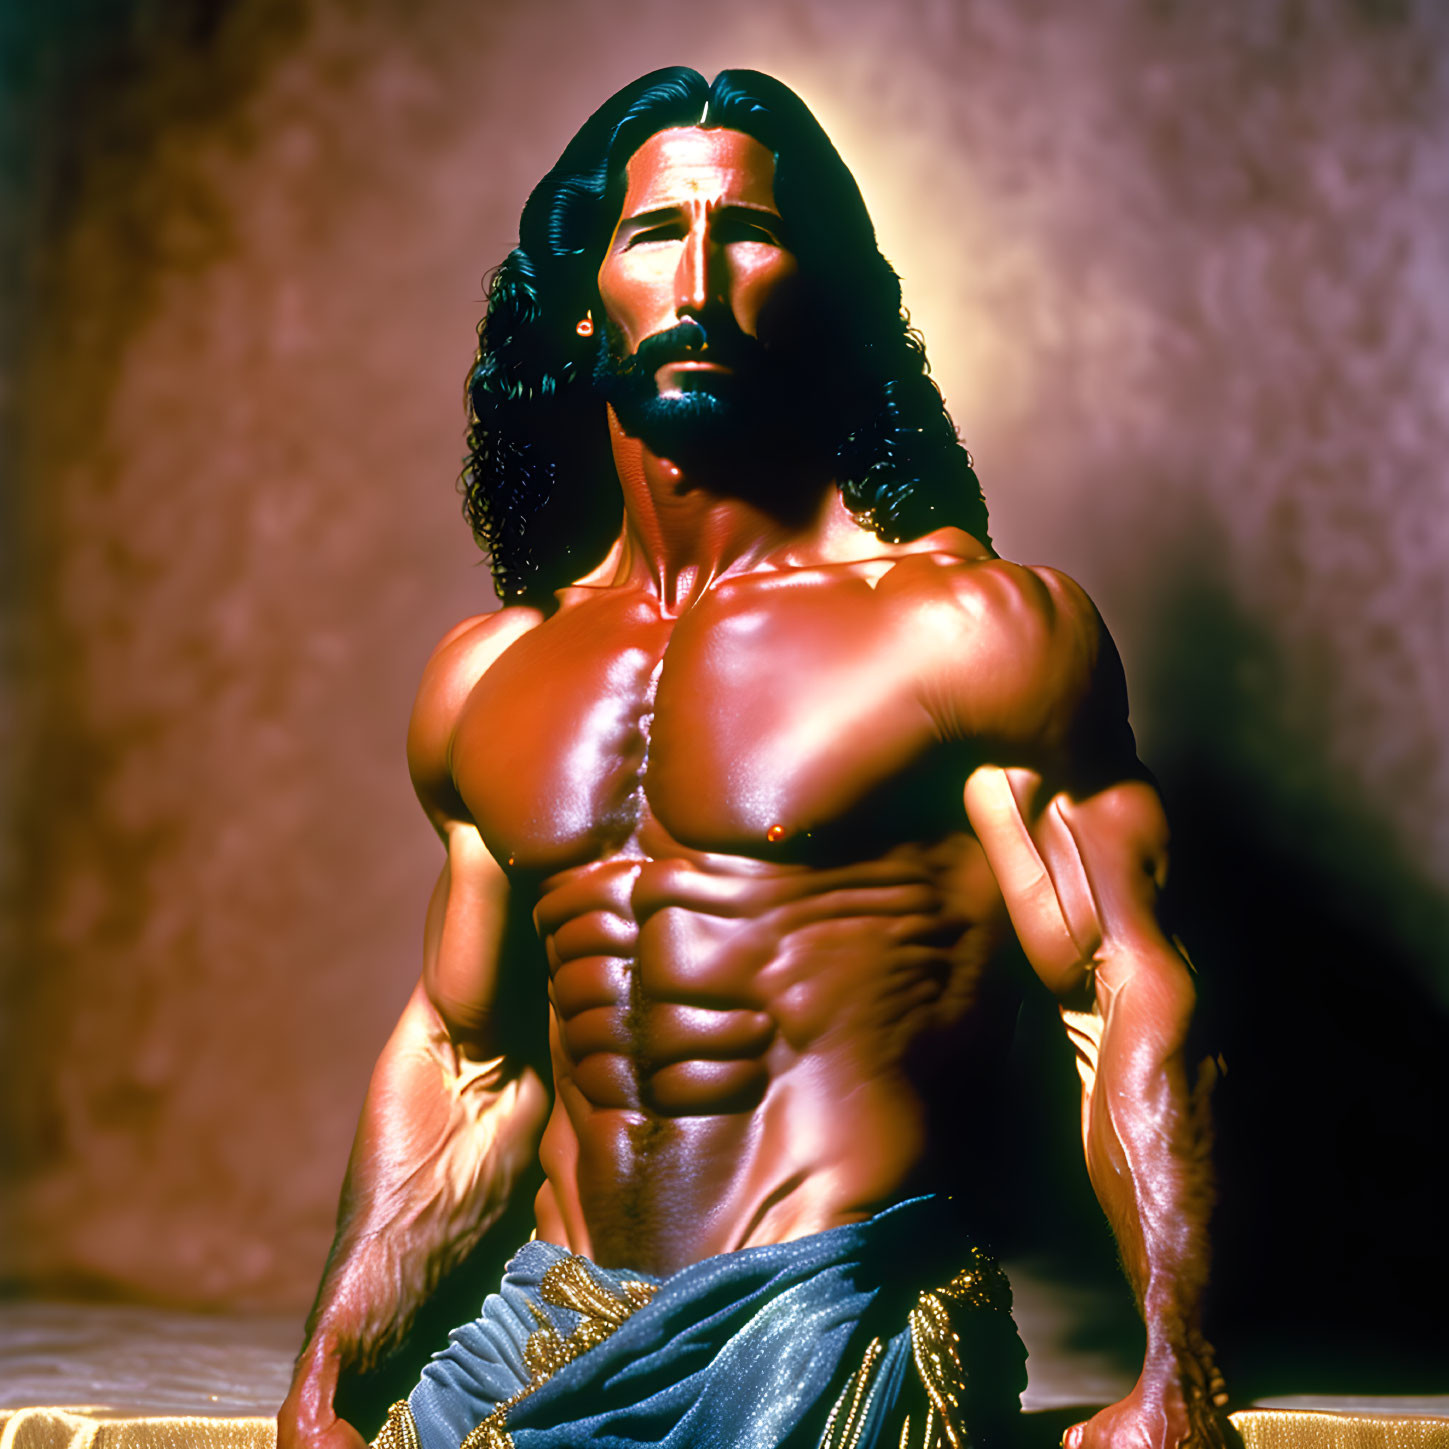 Muscular Figure with Long Hair Displaying Sculpted Physique in Warm Lighting